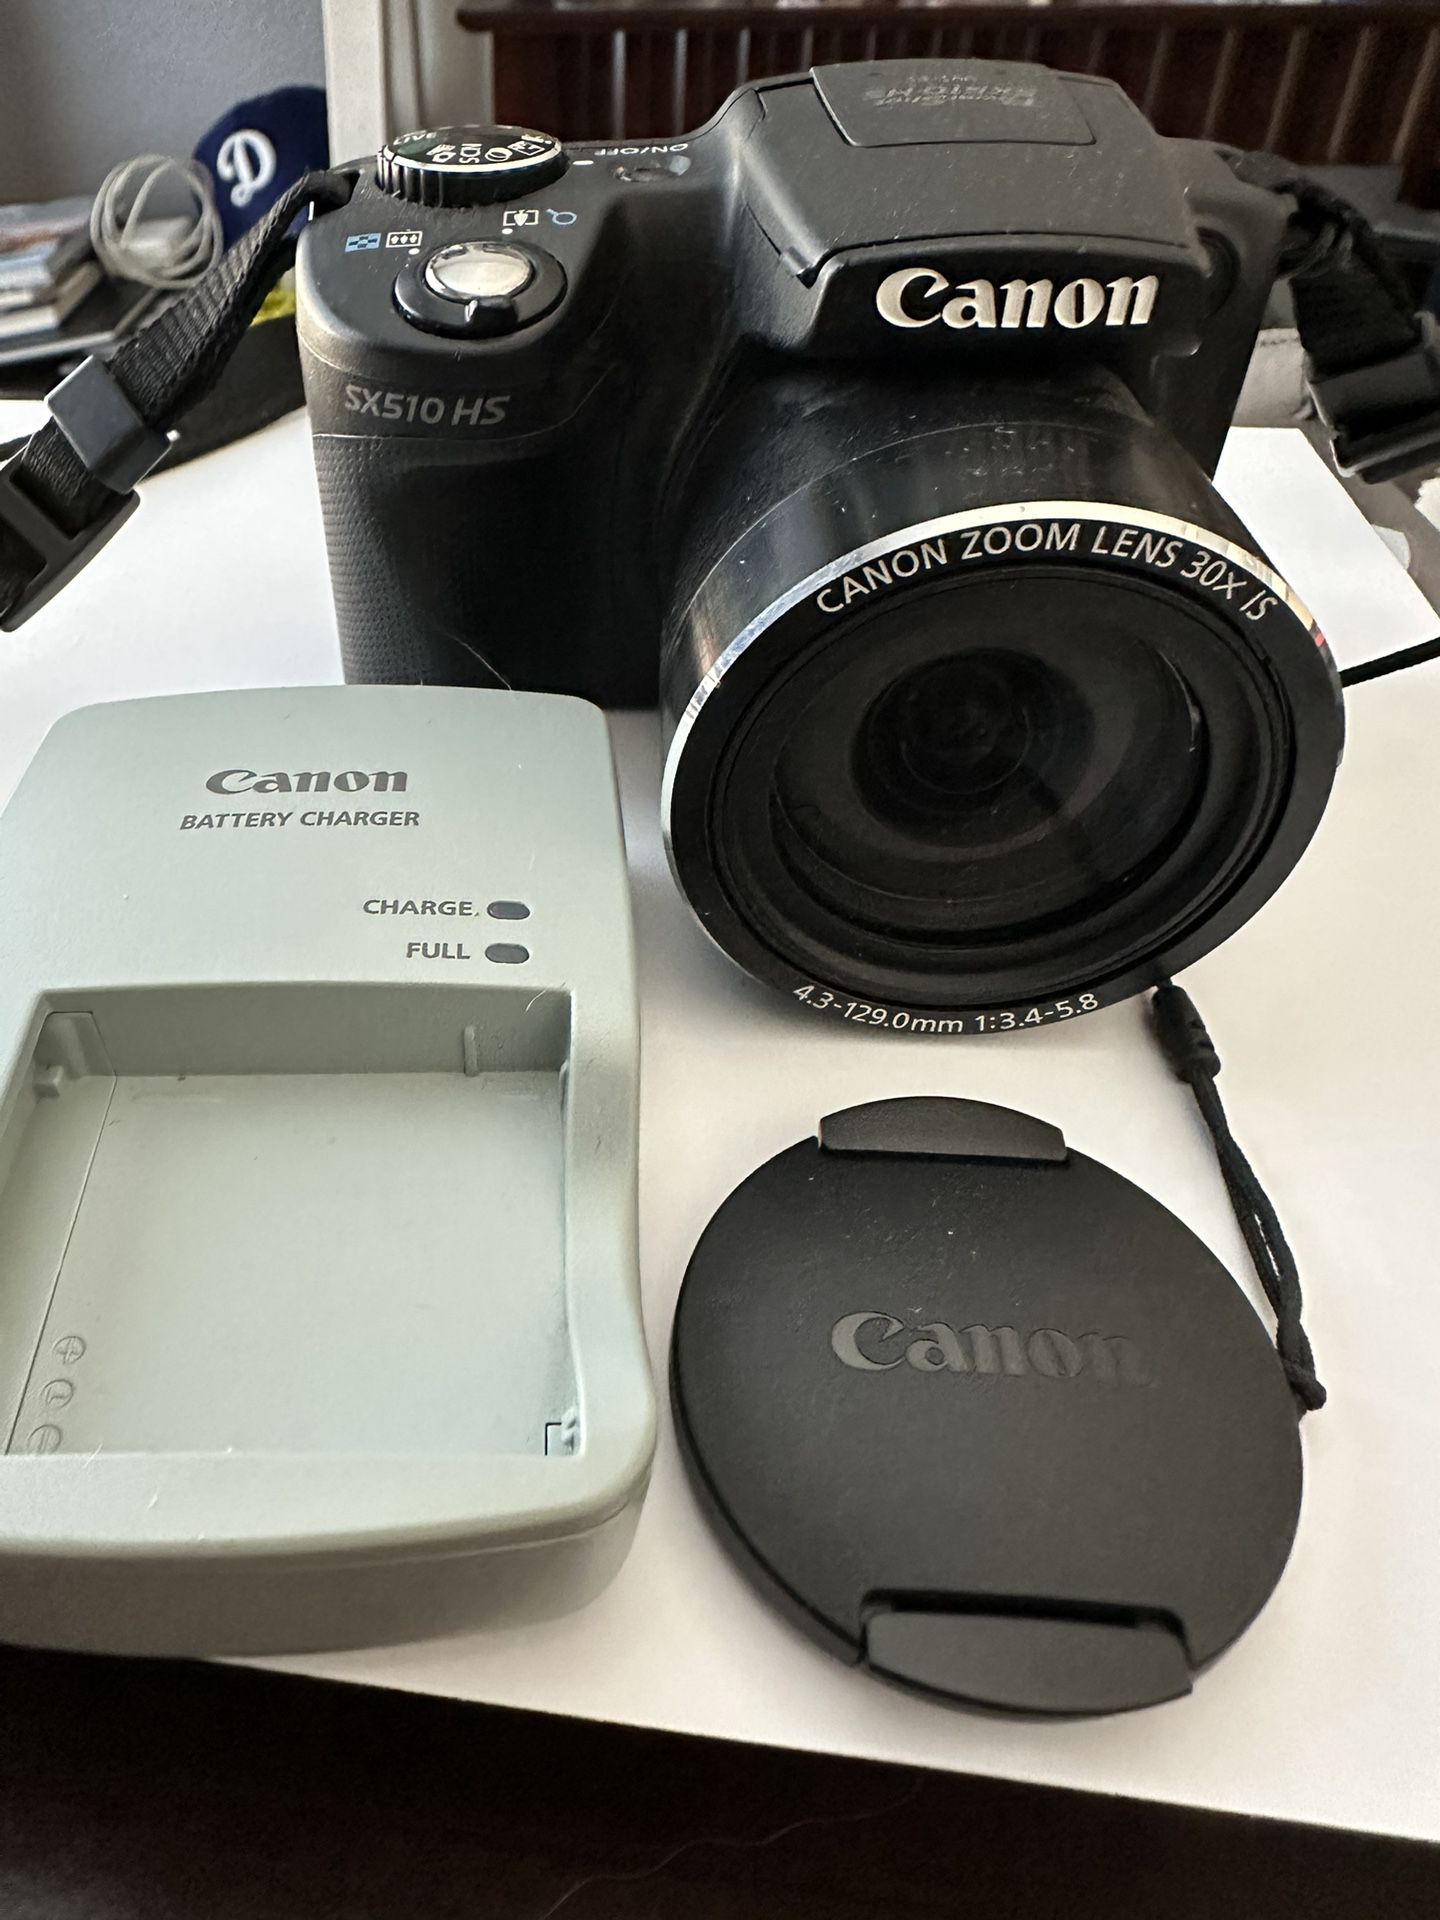 Cannon SX510 For Sale With All Equipment Charger Included